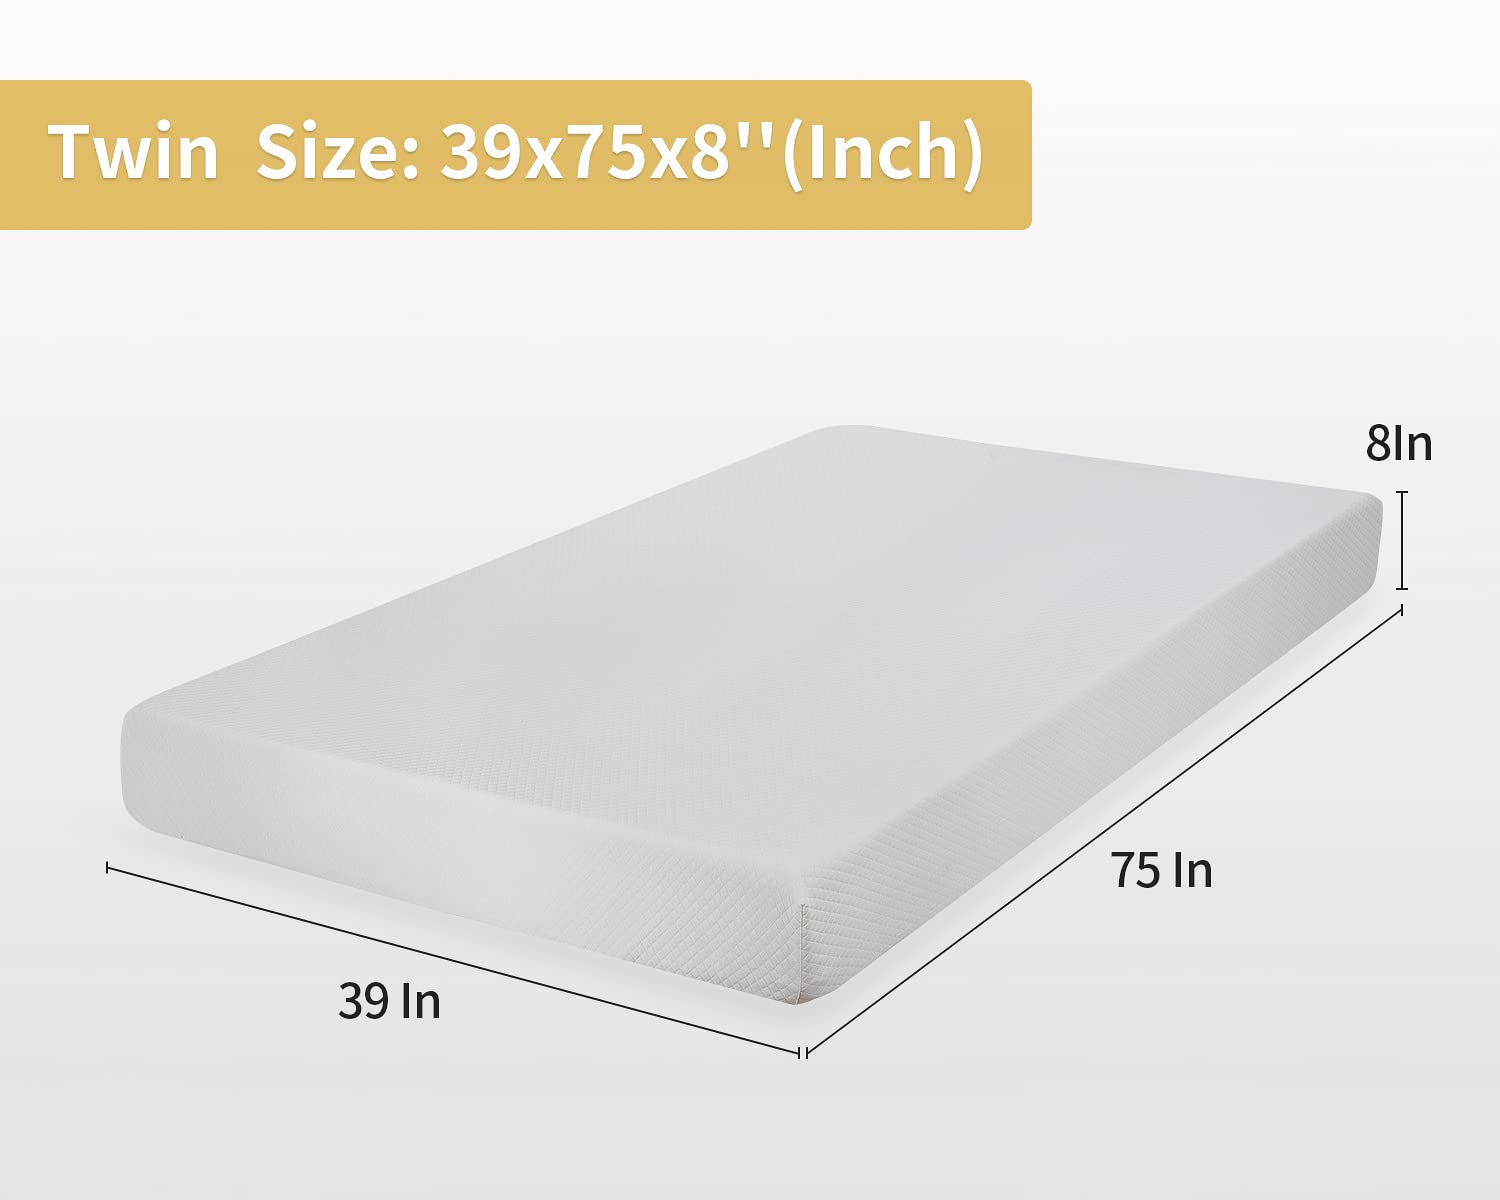 PayLessHere 8 Inch Twin Gel Memory Foam Mattress Fiberglass Free/CertiPUR-US Certified/Bed-in-a-Box/Cool Sleep & Comfy Support